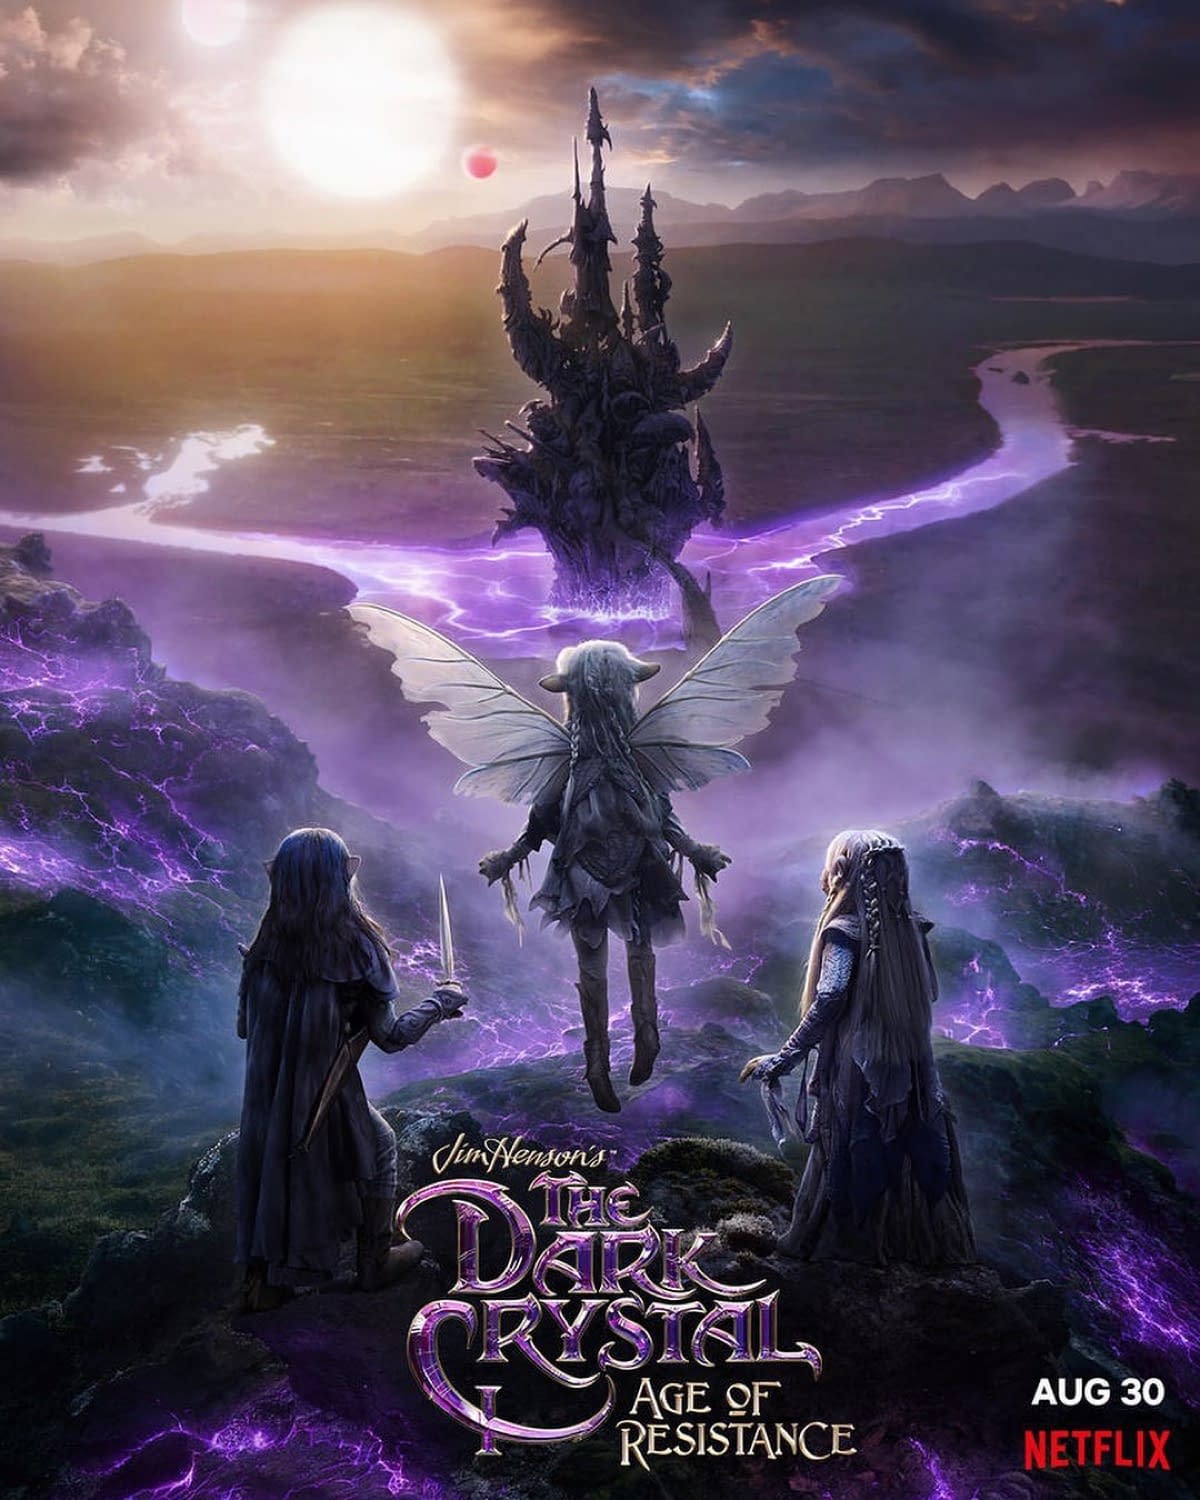 First Teaser Trailer for Netflix Series 'Dark Crystal: Age of Resistance' Hits!